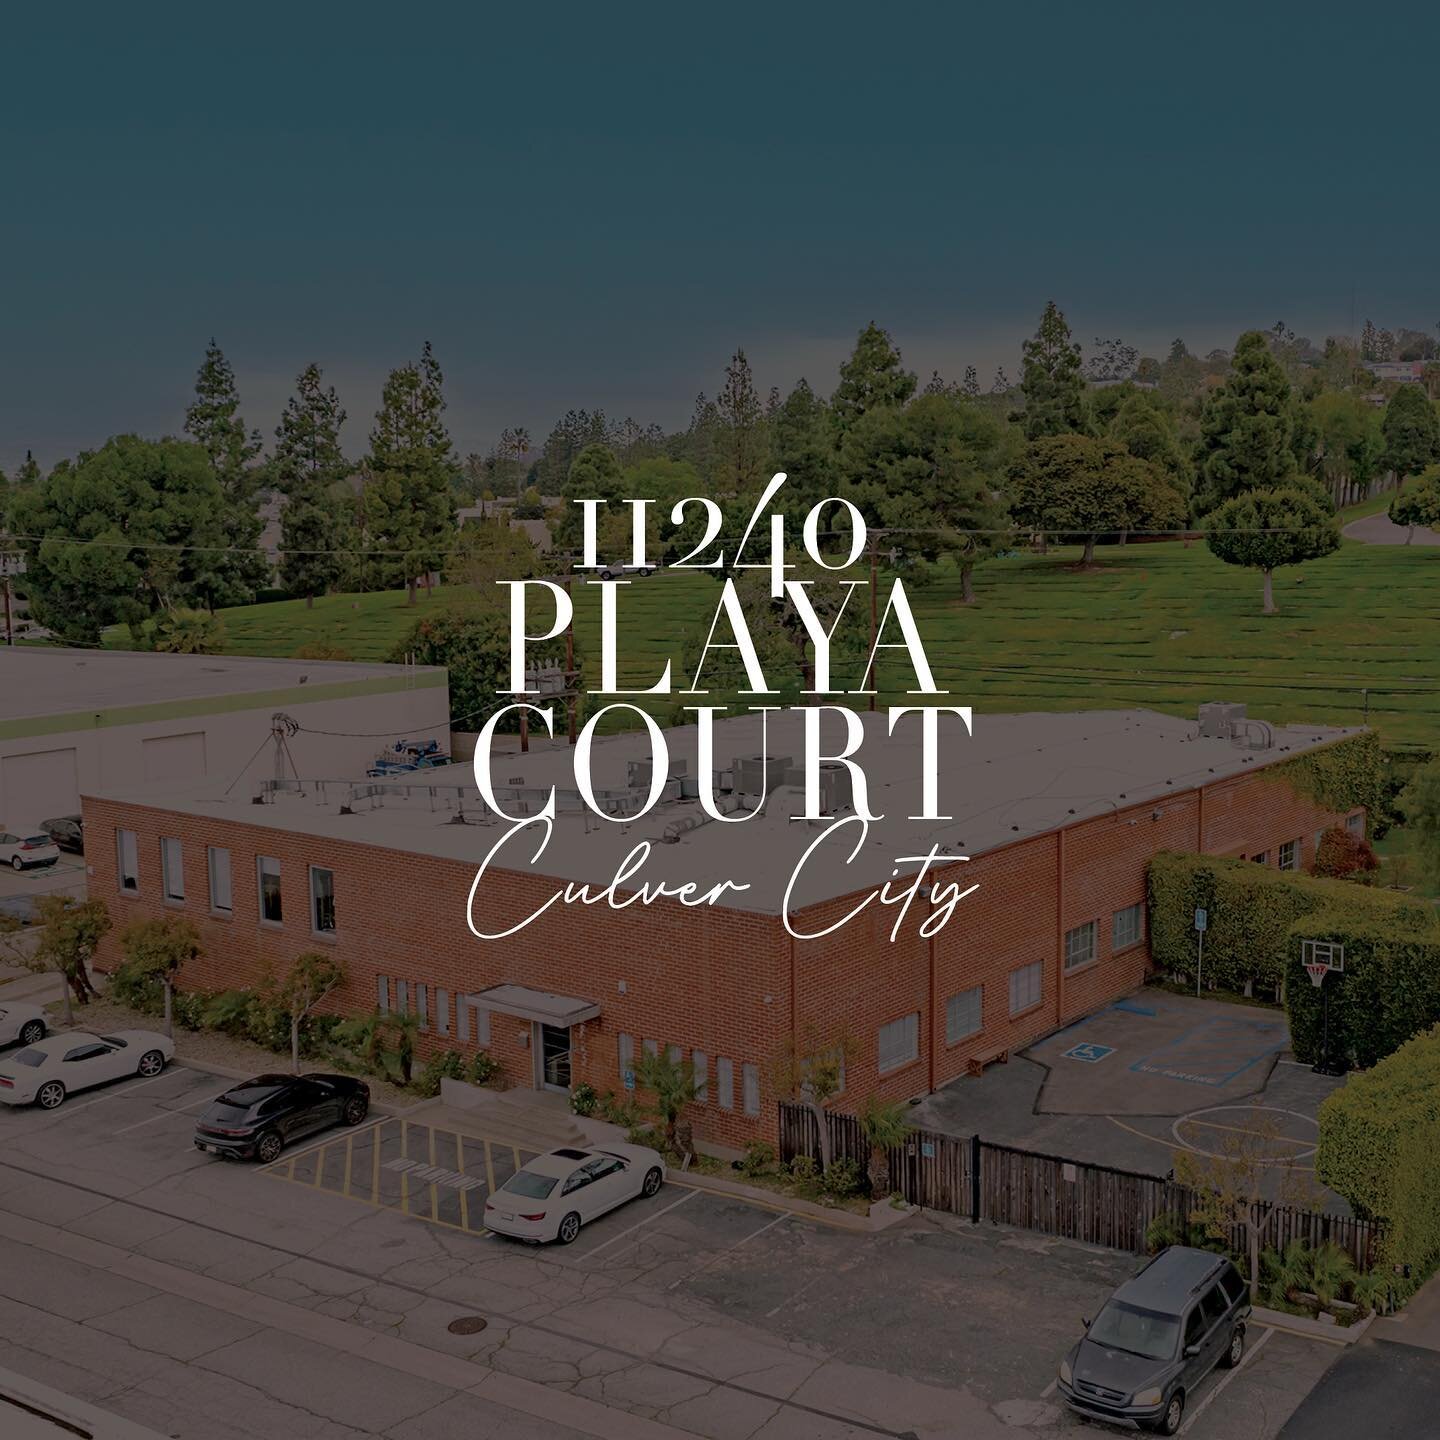 FOR SALE or LEASE 🚩11240 Playa Ct, Culver City 
CREATIVE OFFICE / PRODUCTION / INDUSTRIAL HIGH-END COMPOUND

- SIZE: 14,503 SF
- Turn-key modern &amp; creative space with 12-20ft ceilings
- Situated along Culver City Media Corridor, adjacent to Sony